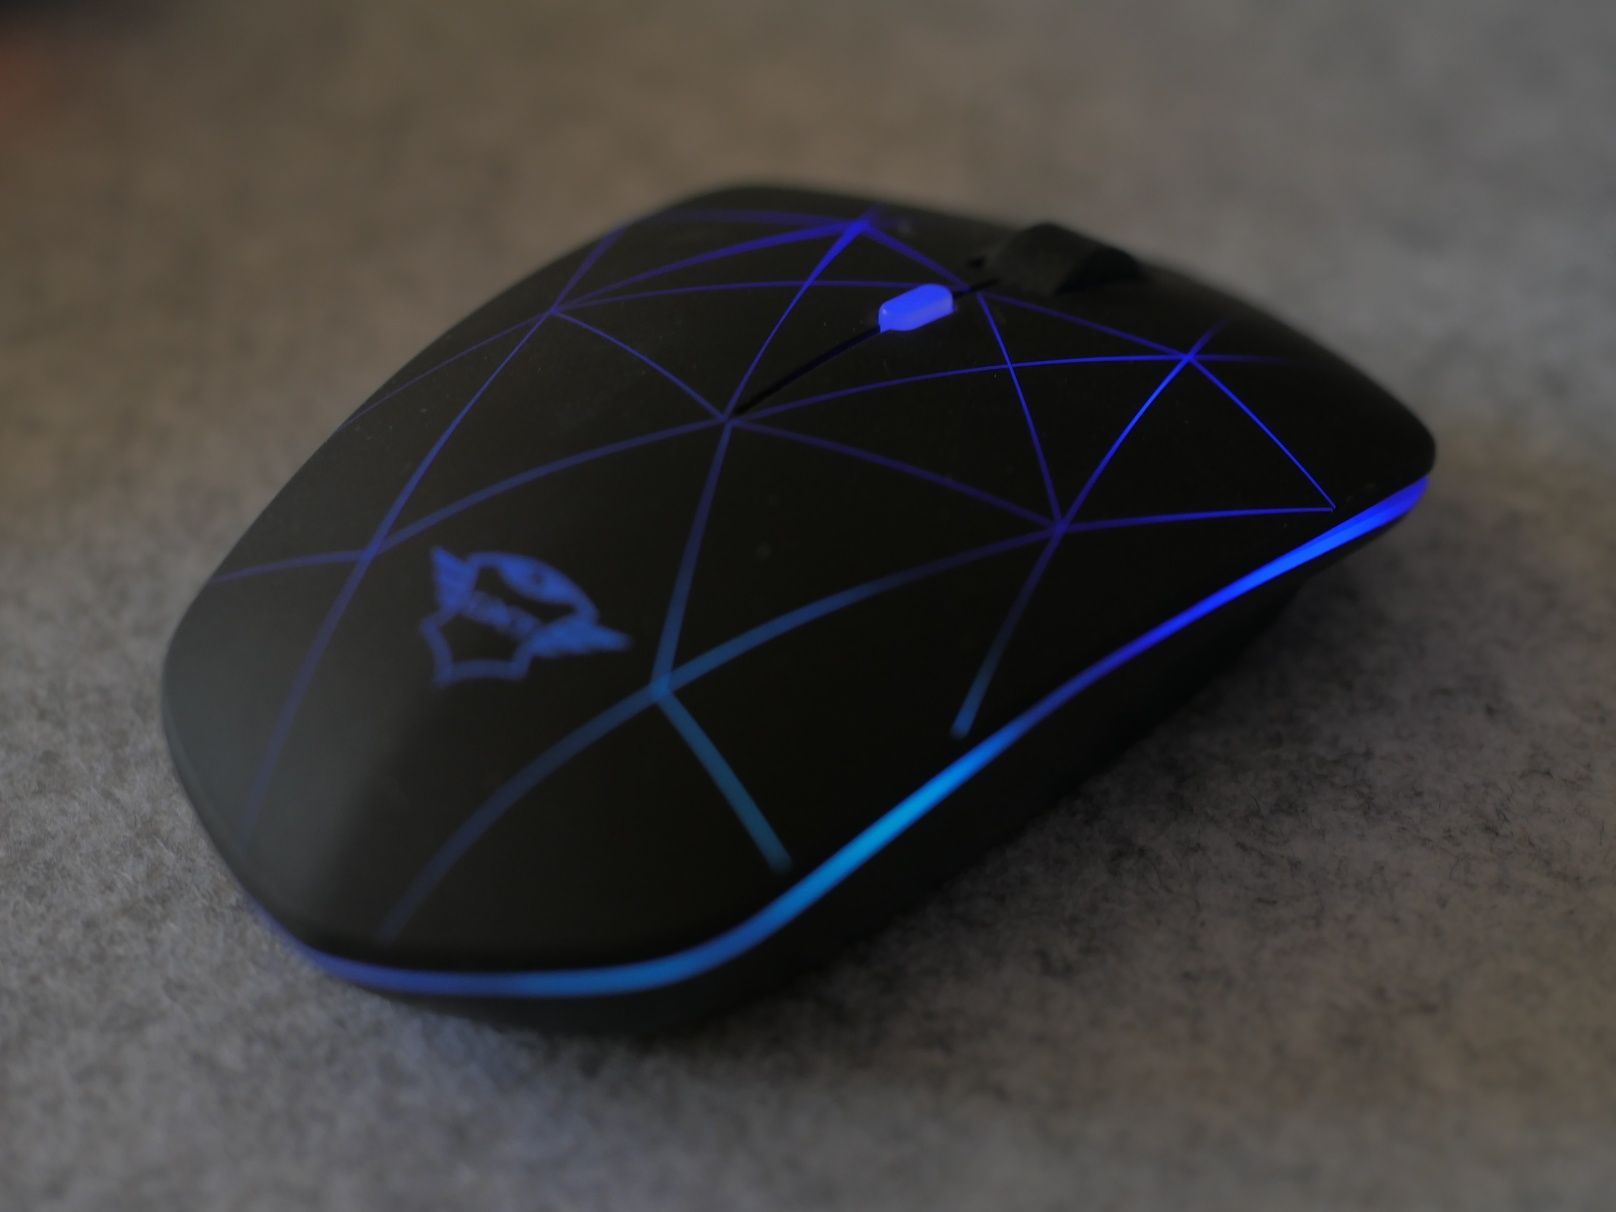 Mouse gaming Wireless Trust Strike